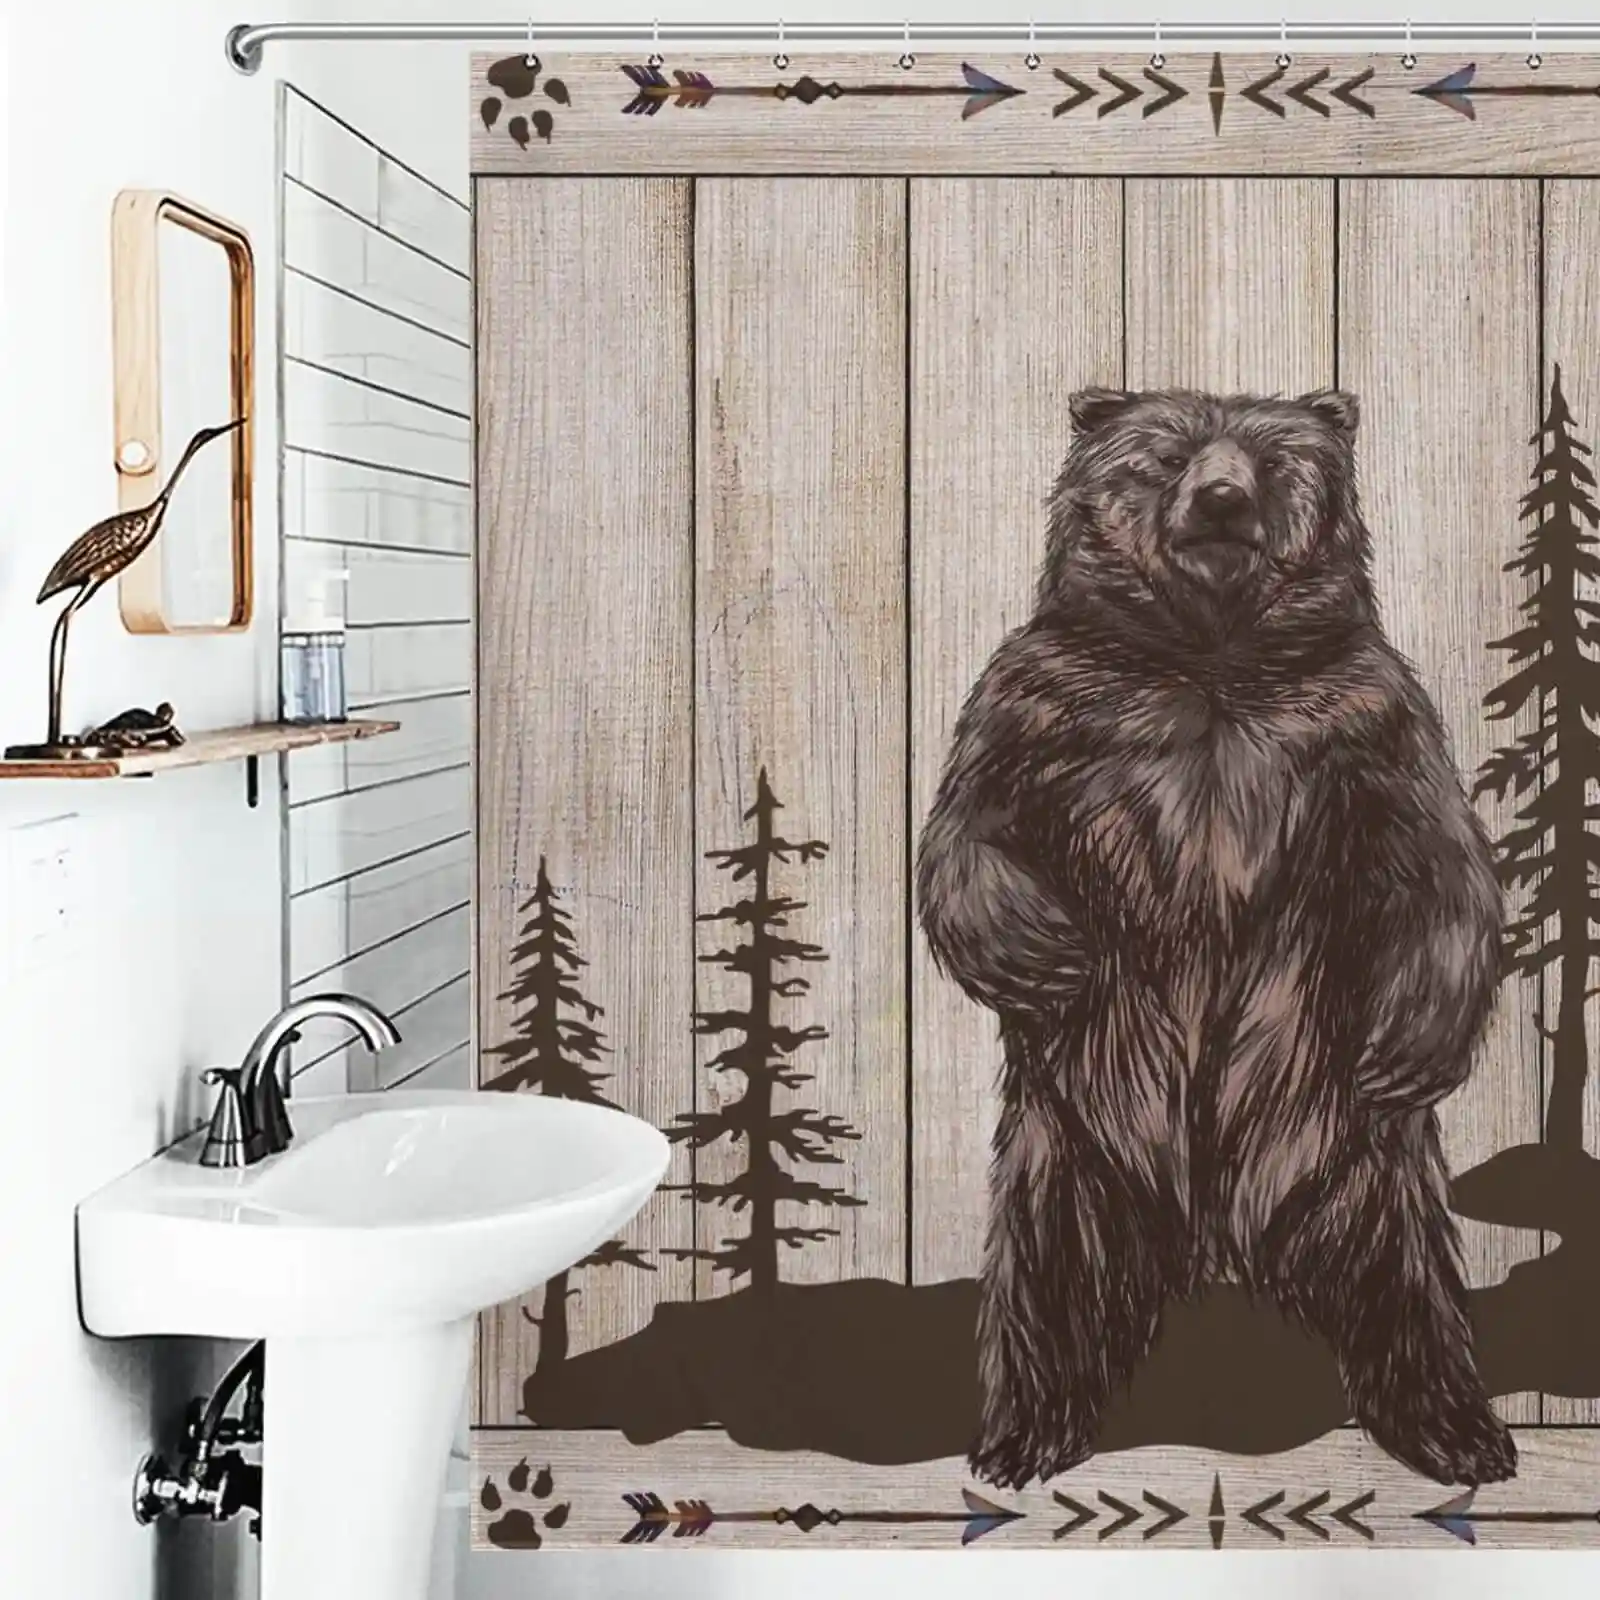 A shower curtain with a bear and arrows on it.